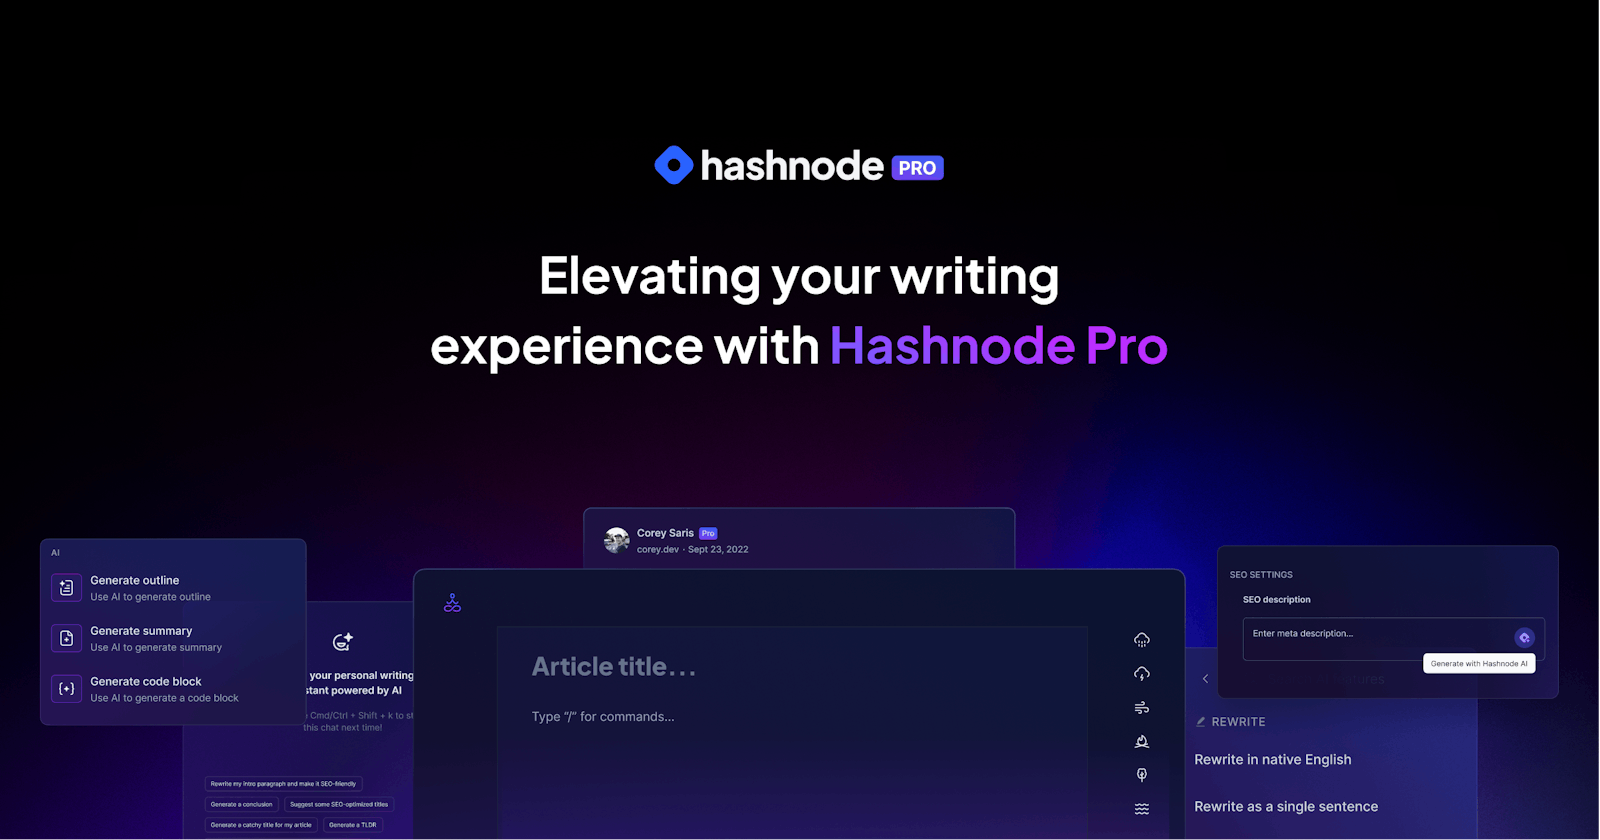 🚀 Meet Hashnode Pro: Powerful features to fuel your best writing